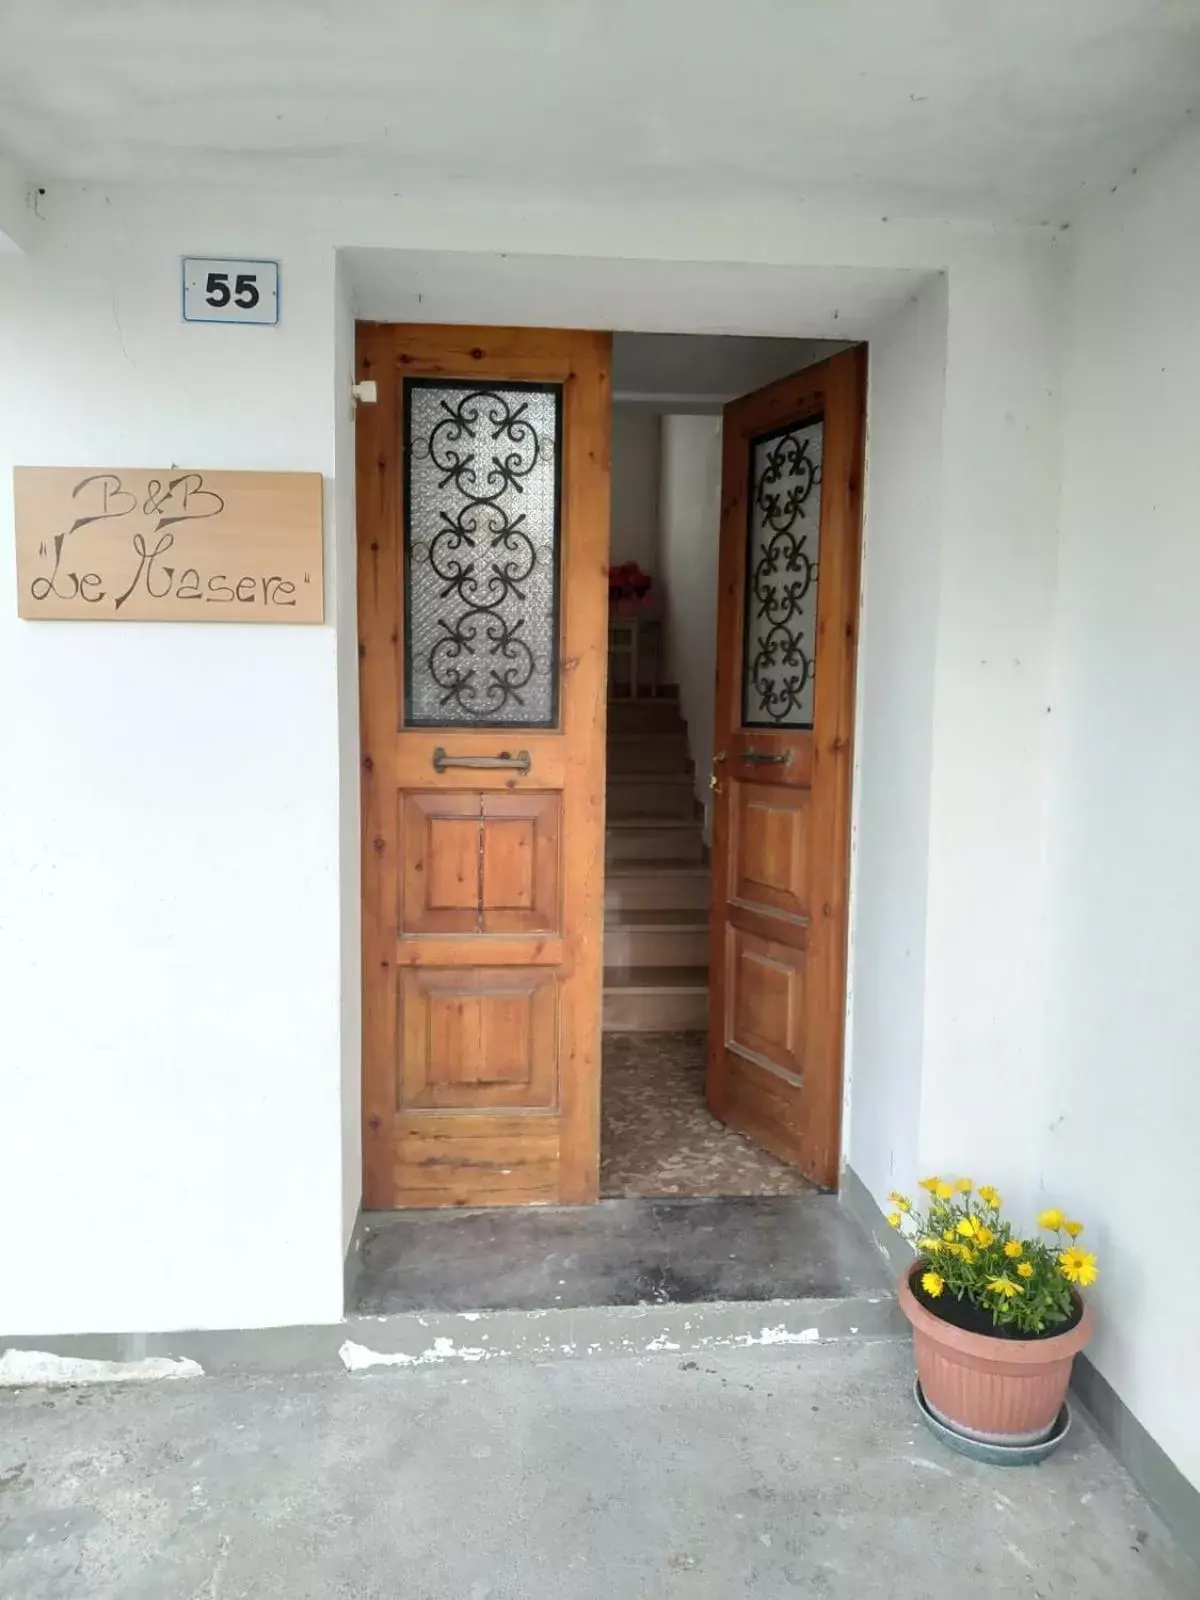 Property building in BeB Le Masere